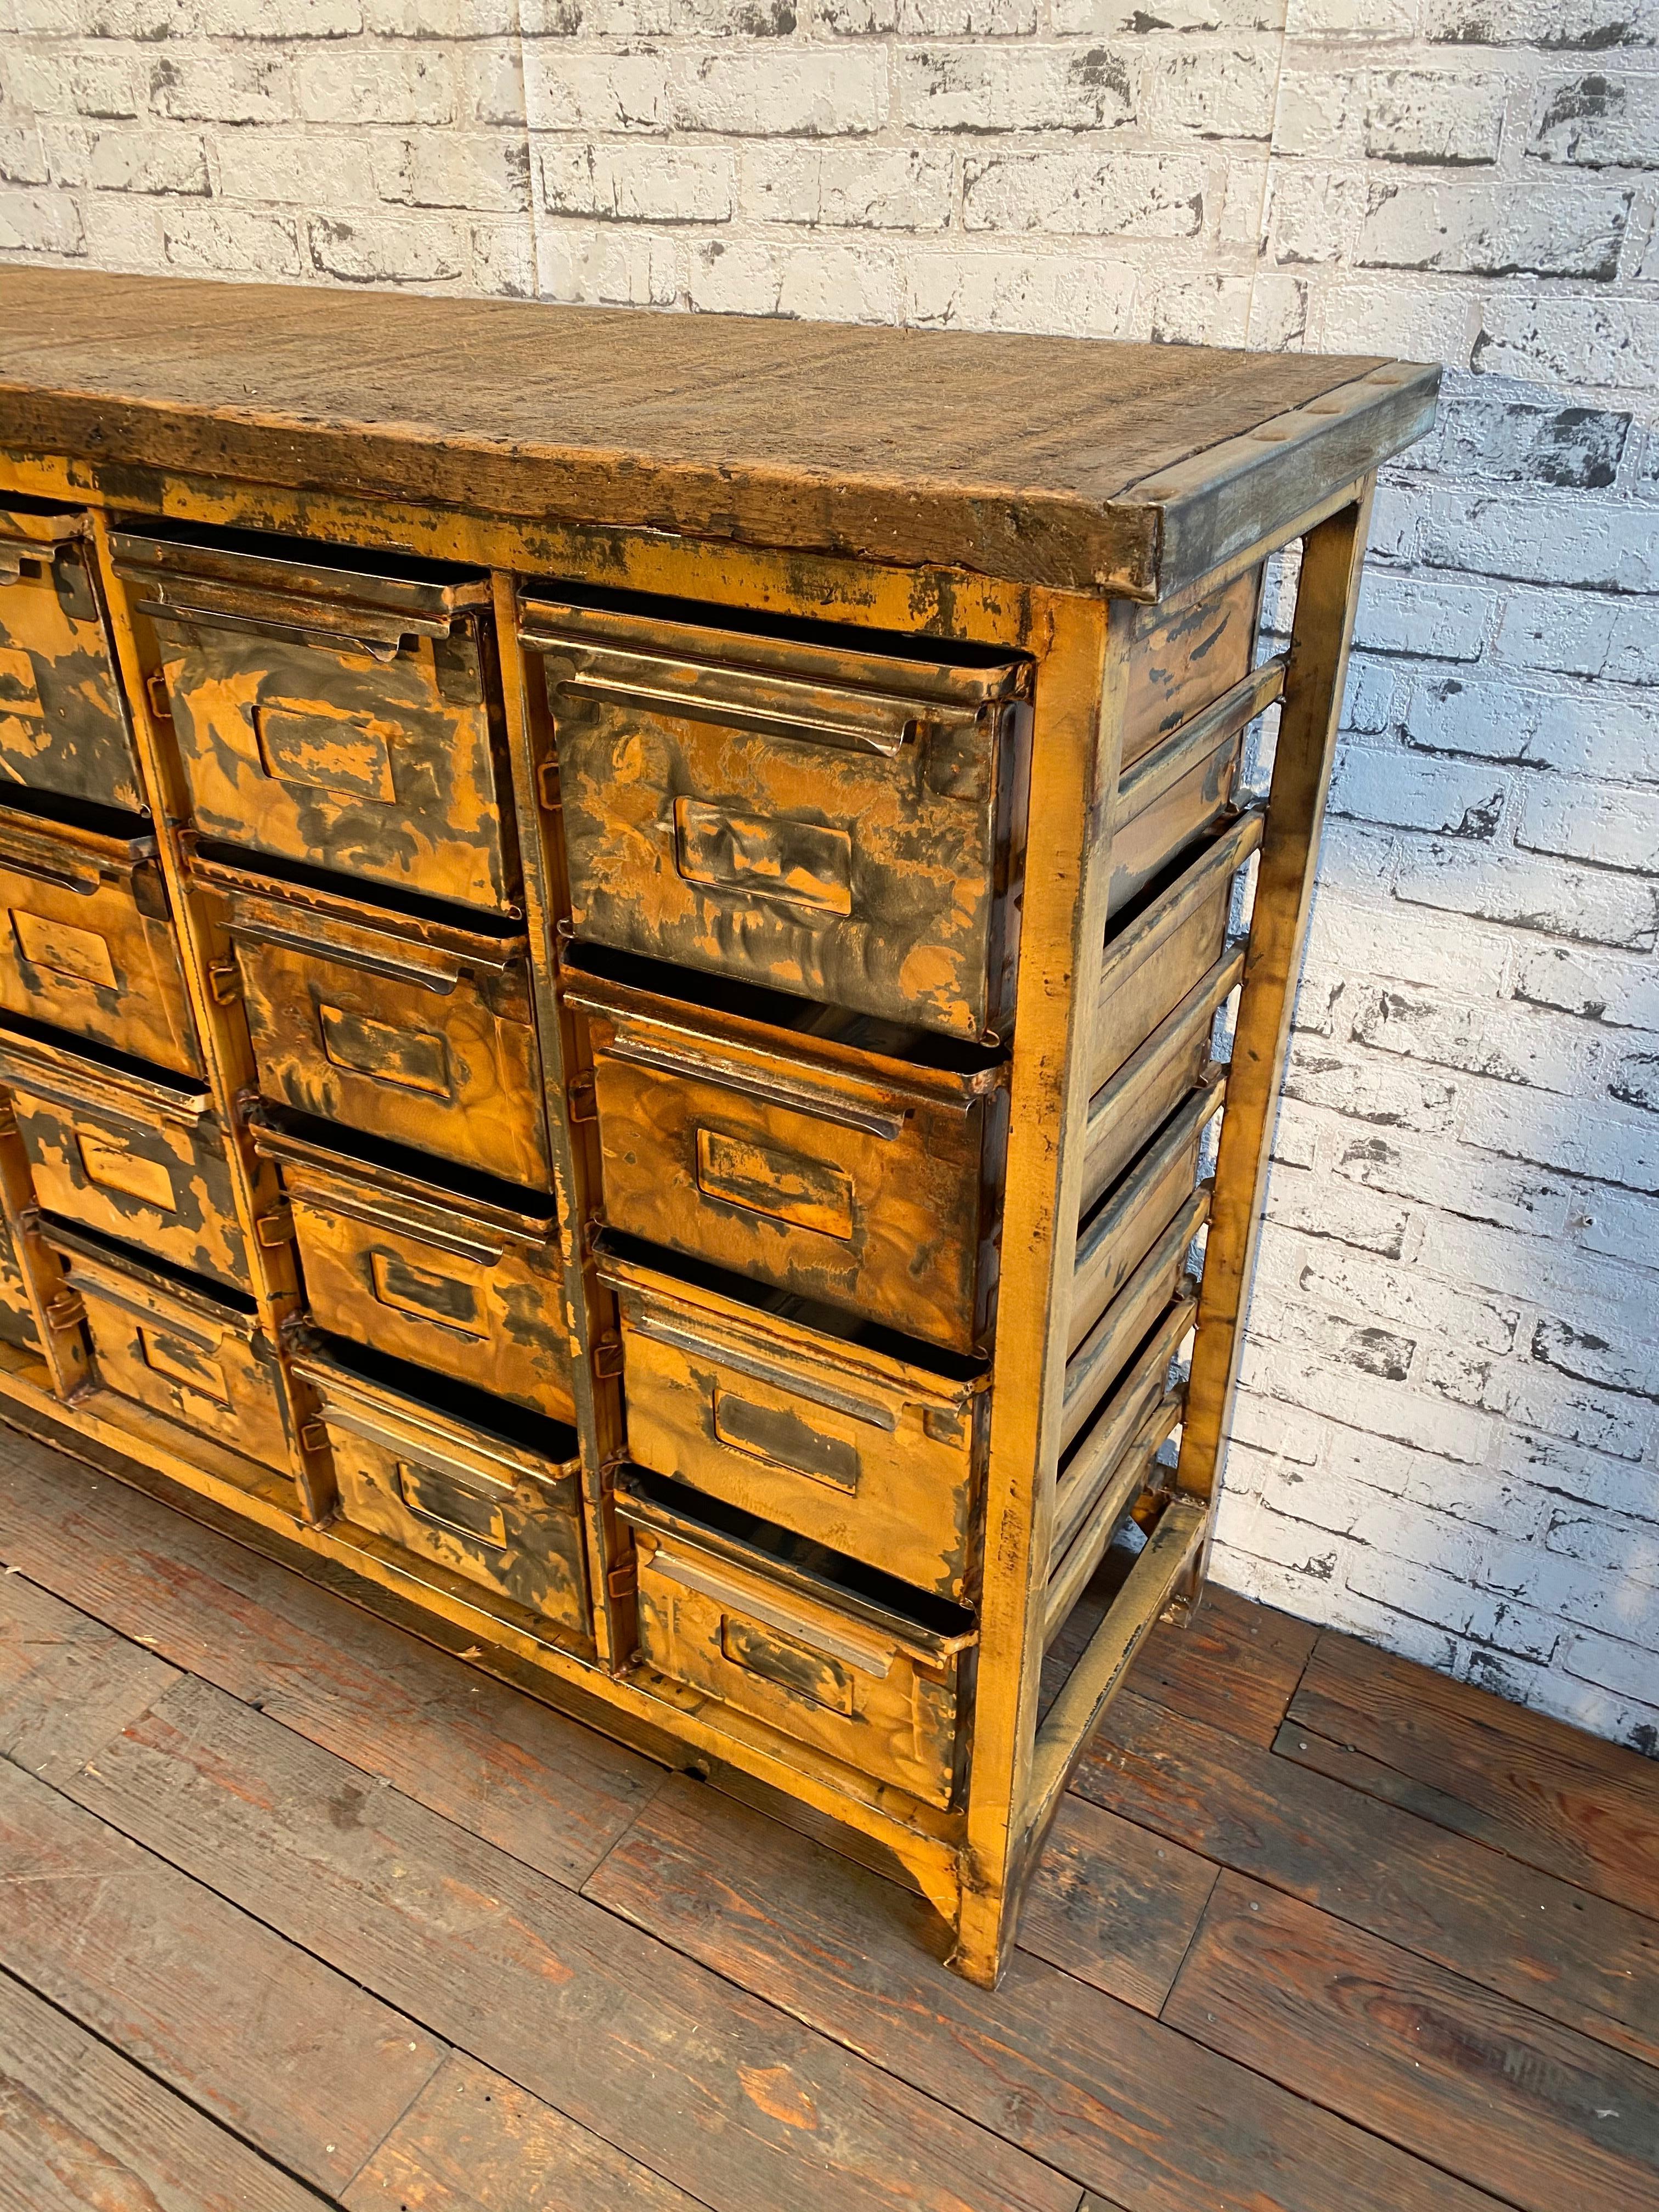 This vintage industrial iron chest of drawers was made during the 1950s. It features an iron construction, an old wooden top, and 16 metal drawers. 
Additional dimensions:
- Drawer dimensions: Width 26 cm, depth 38 cm, height 19 cm 
- Weight: 80